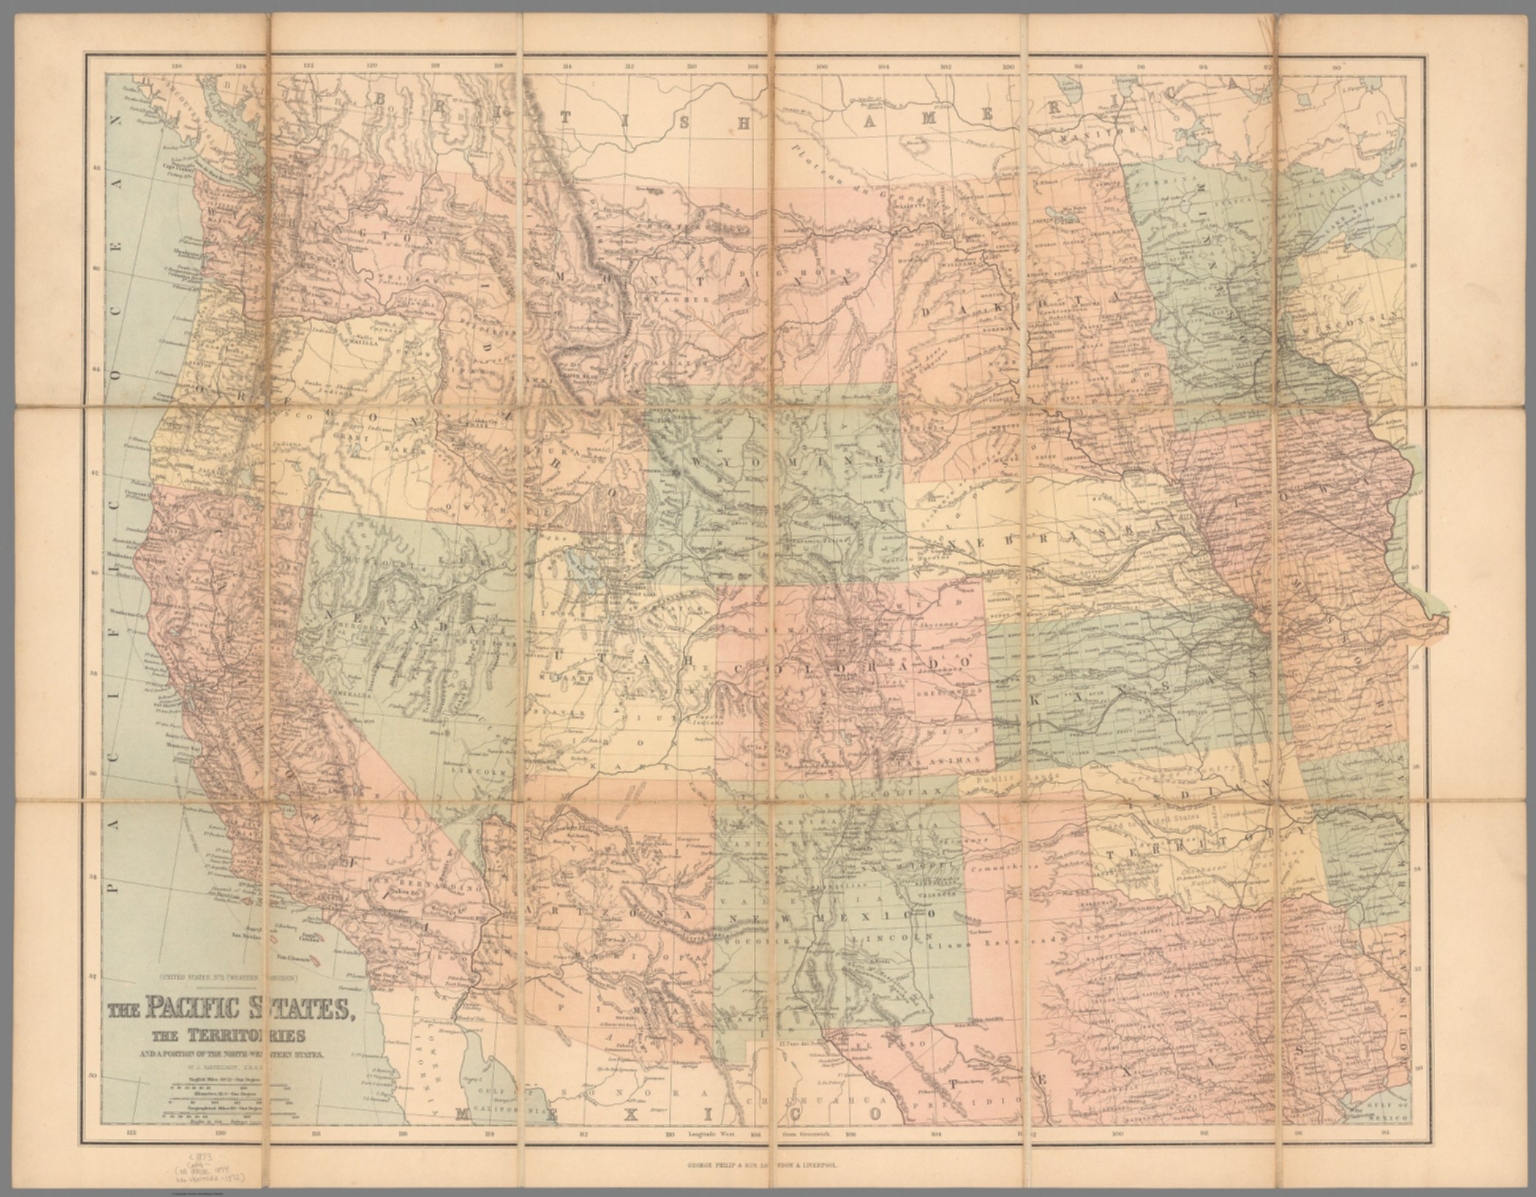 The Pacific States, The Territories And A Portion Of The North-Western States. By J. Bartholomew, F.R.G.S. George Philip & Son, London & Liverpool. (above the title) (United States, No. II (Western Division).